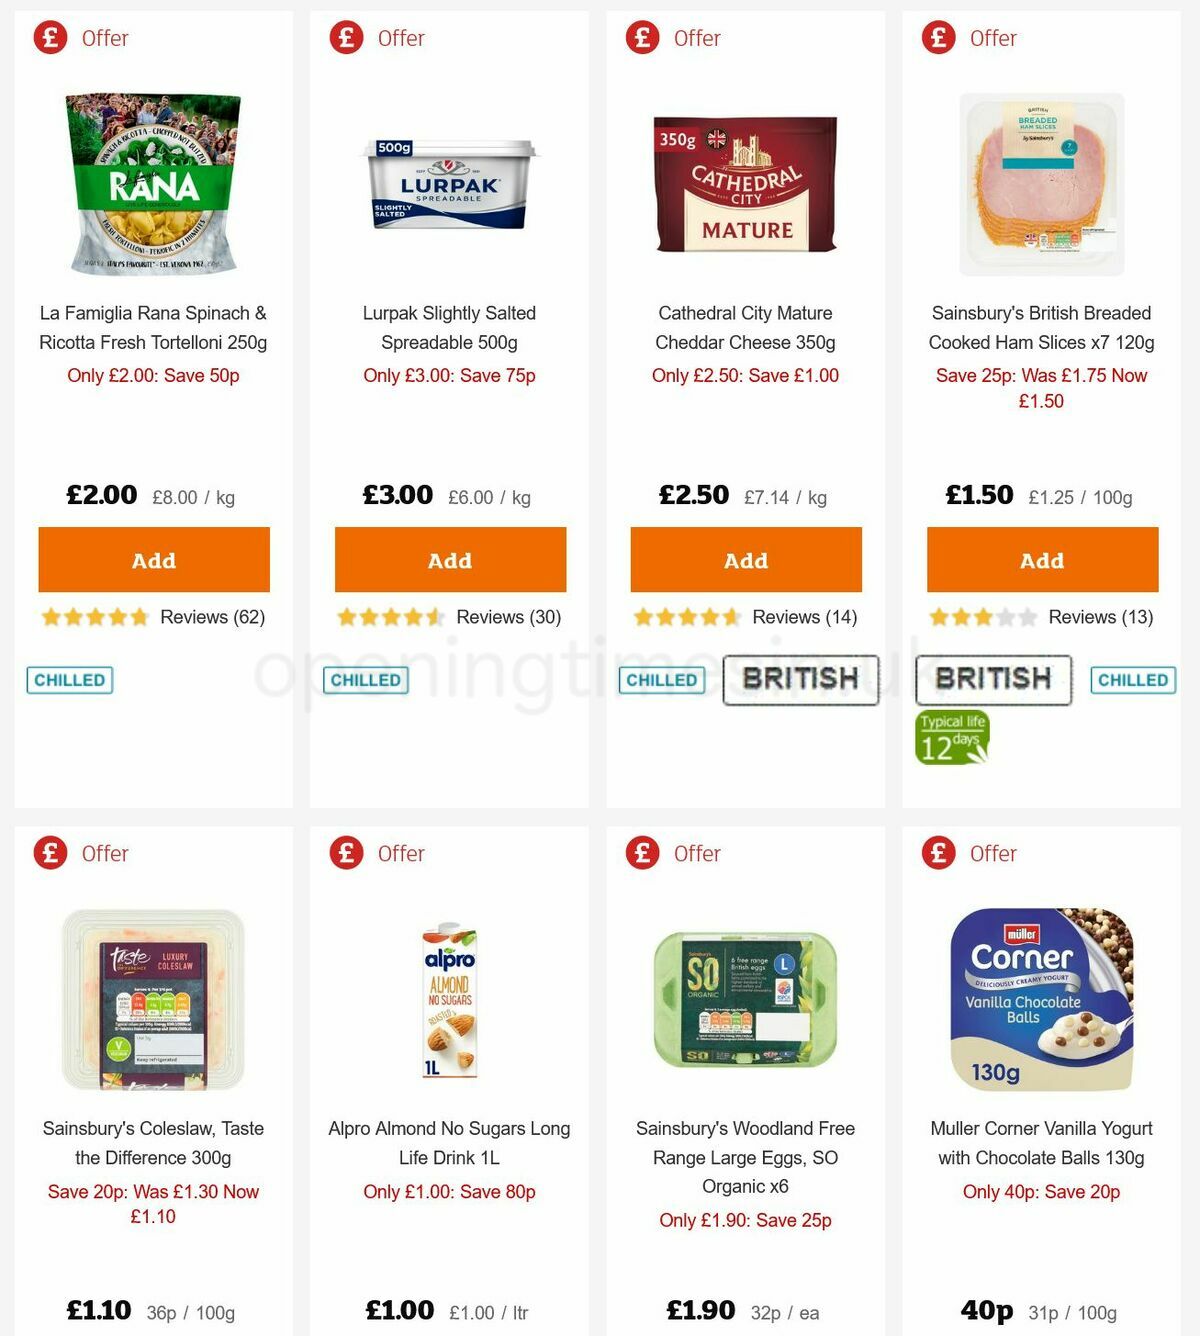 Sainsbury's Offers from 1 October